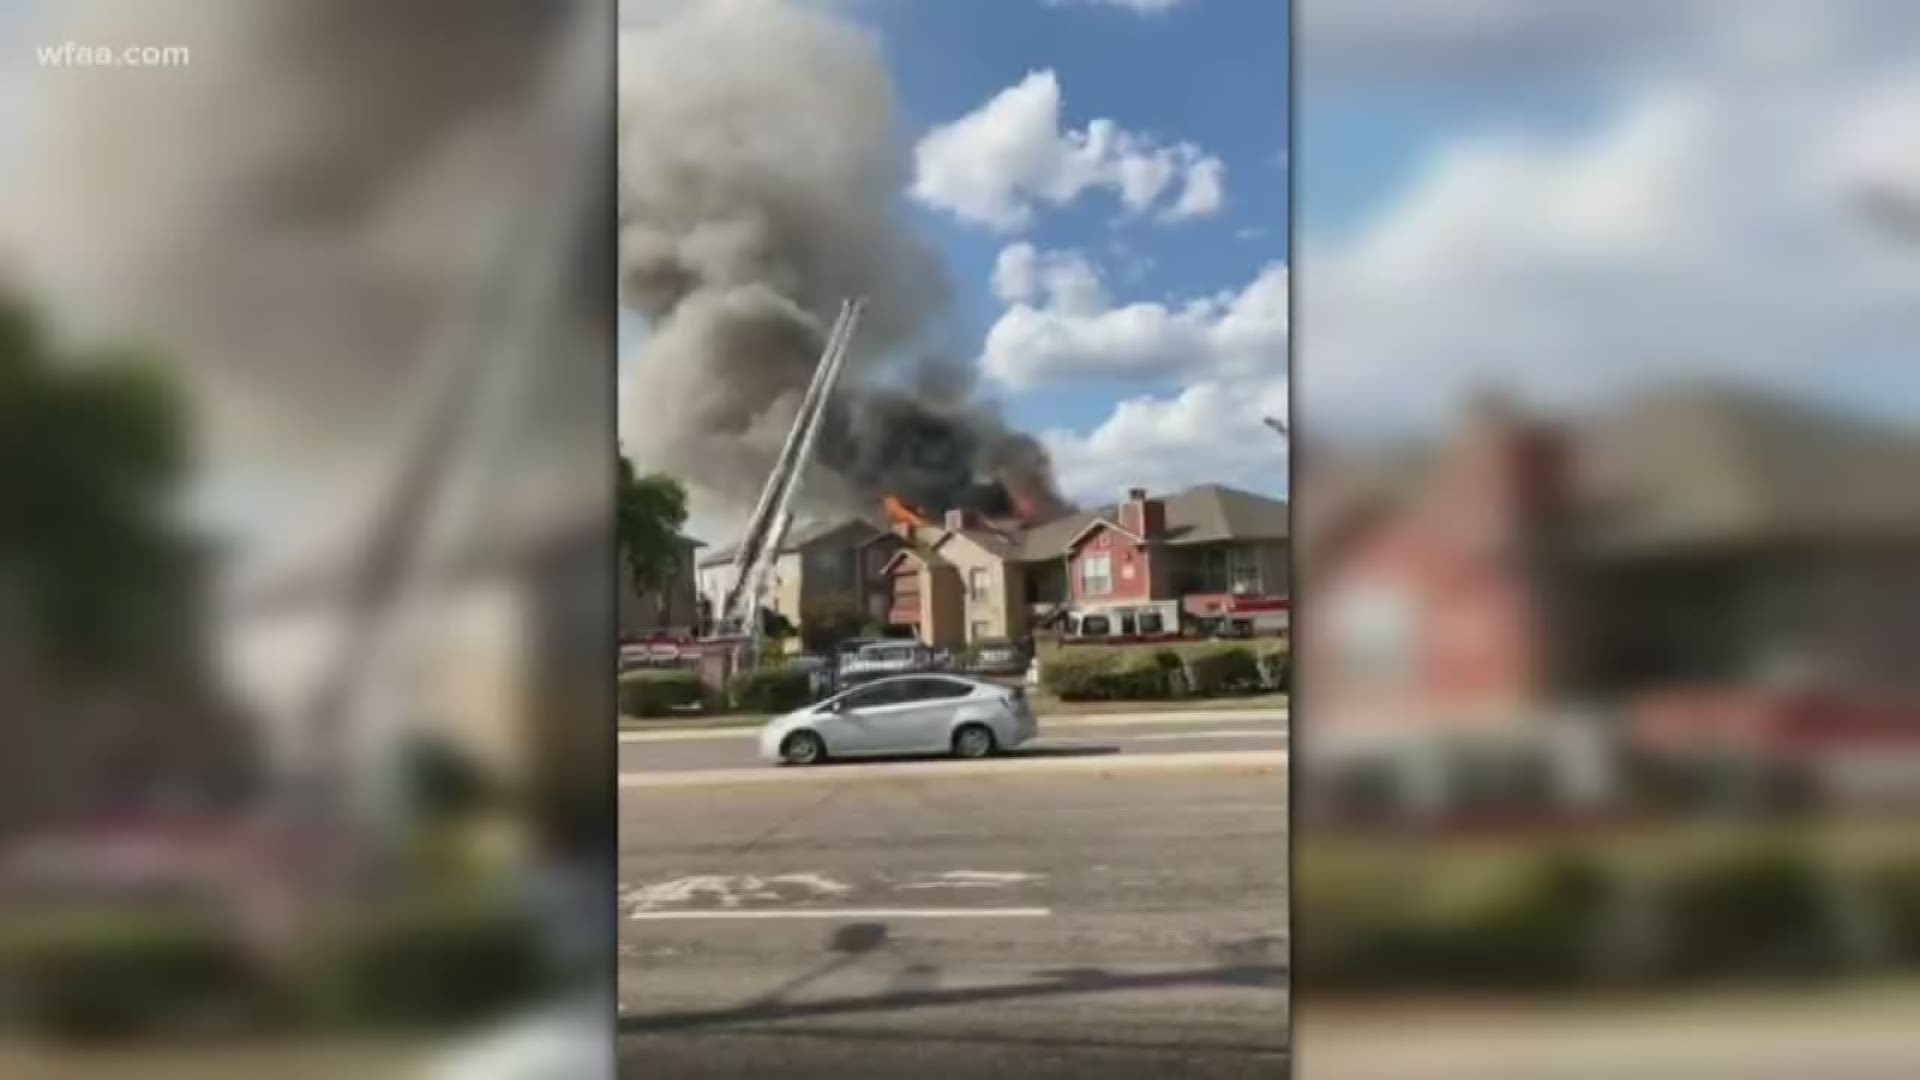 More than 30 people were displaced after a four-alarm fire at an Arlington apartment complex.